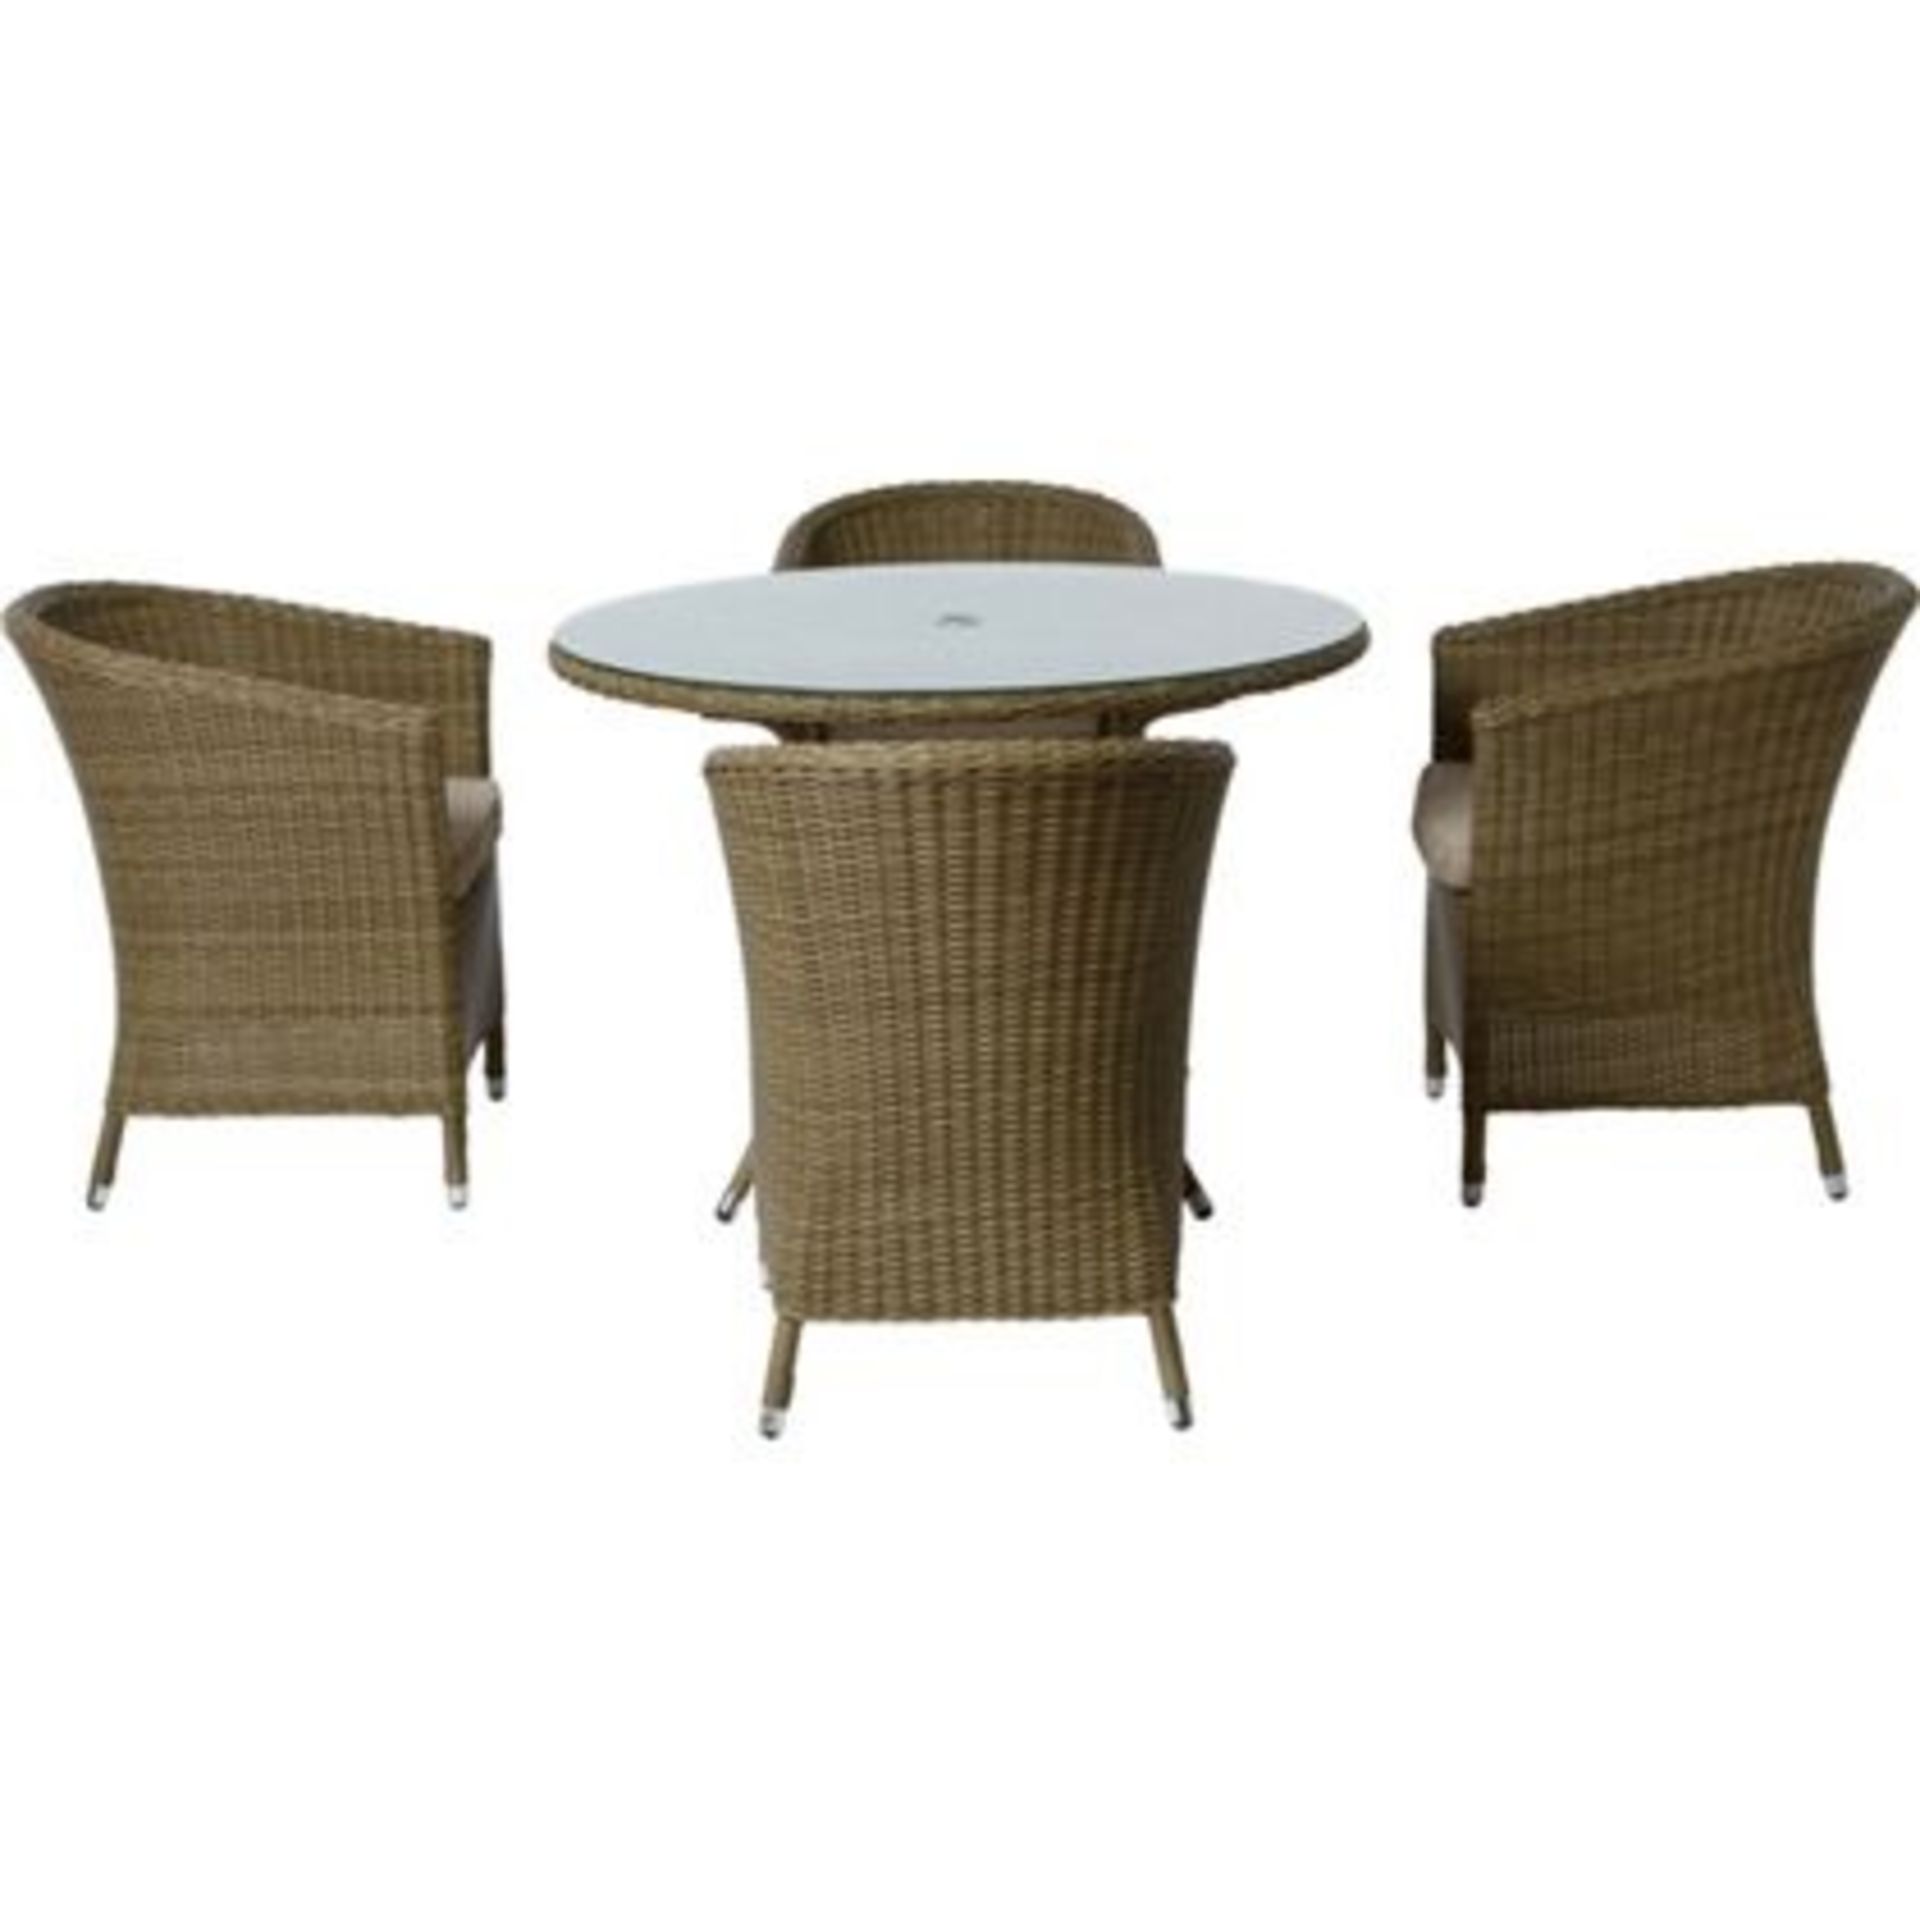 1 x New Worcester 4 Seater Rattan Effect Garden Furniture Set. RRP £599.99. ade from hand woven - Image 4 of 5